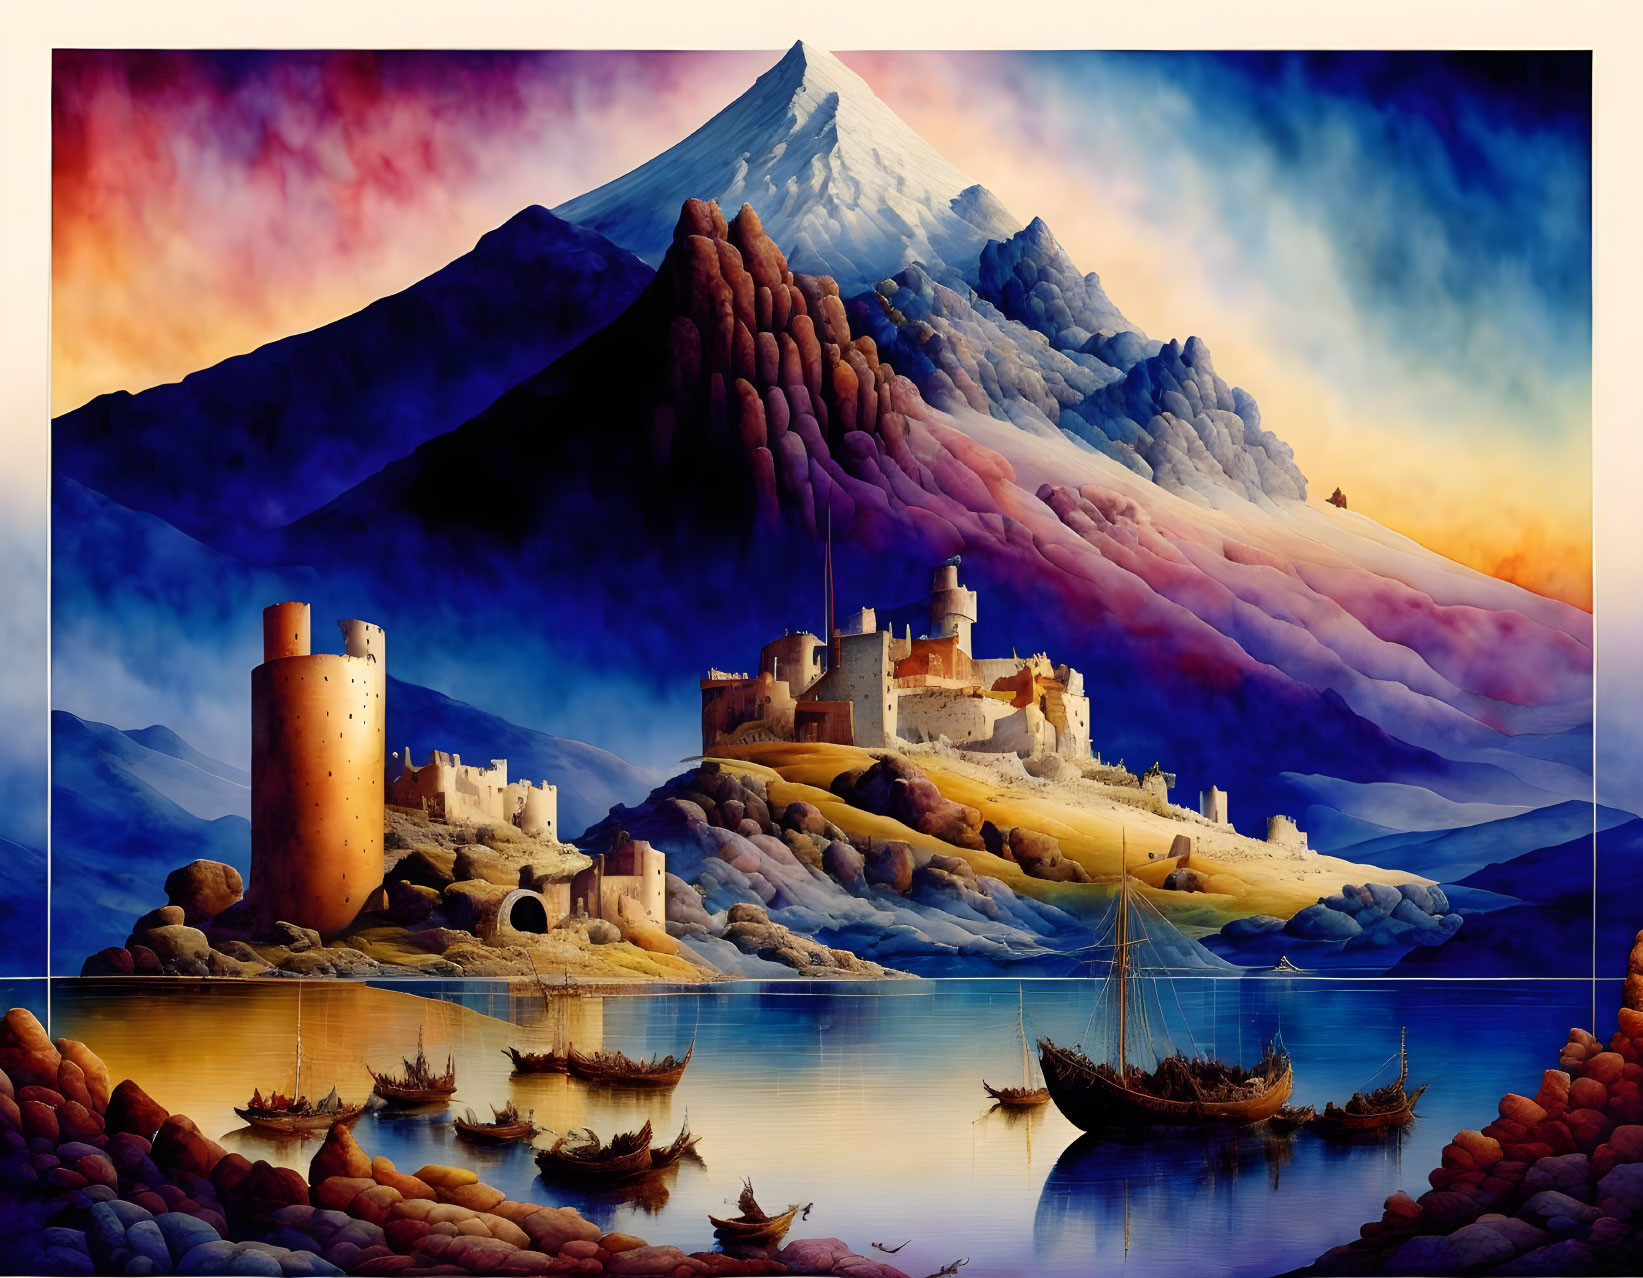 Medieval castle by a lake with boats under a snowy mountain in vibrant, colorful sky